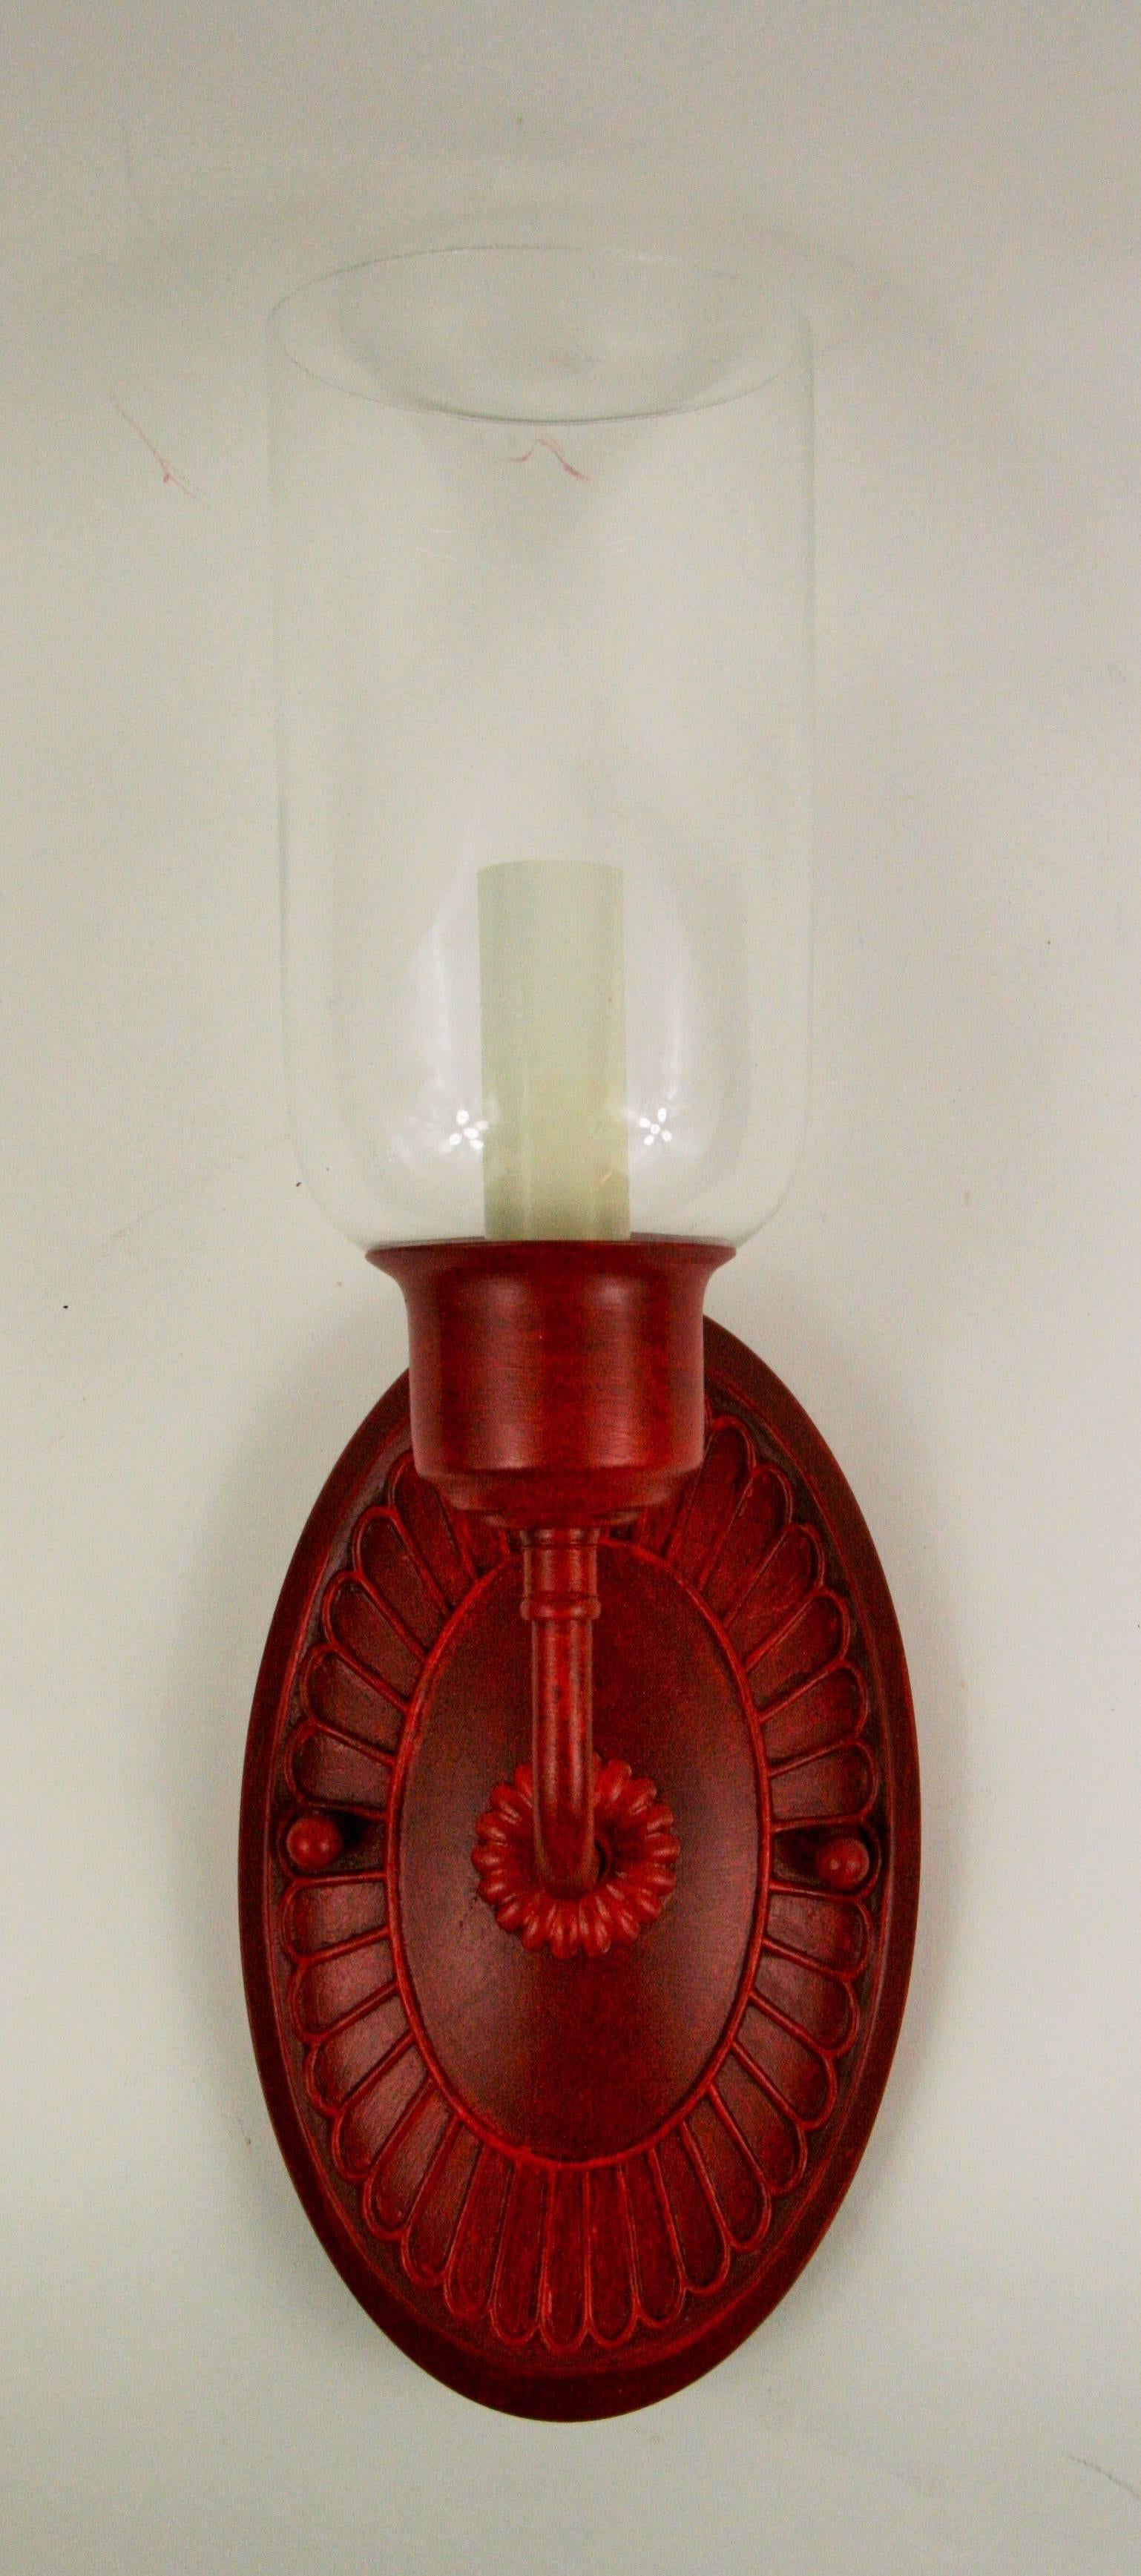 2-4007 pair of hand painted red brass sconces with clear glass hurricane shade.
Takes one 60 watt candelabra base bulb.